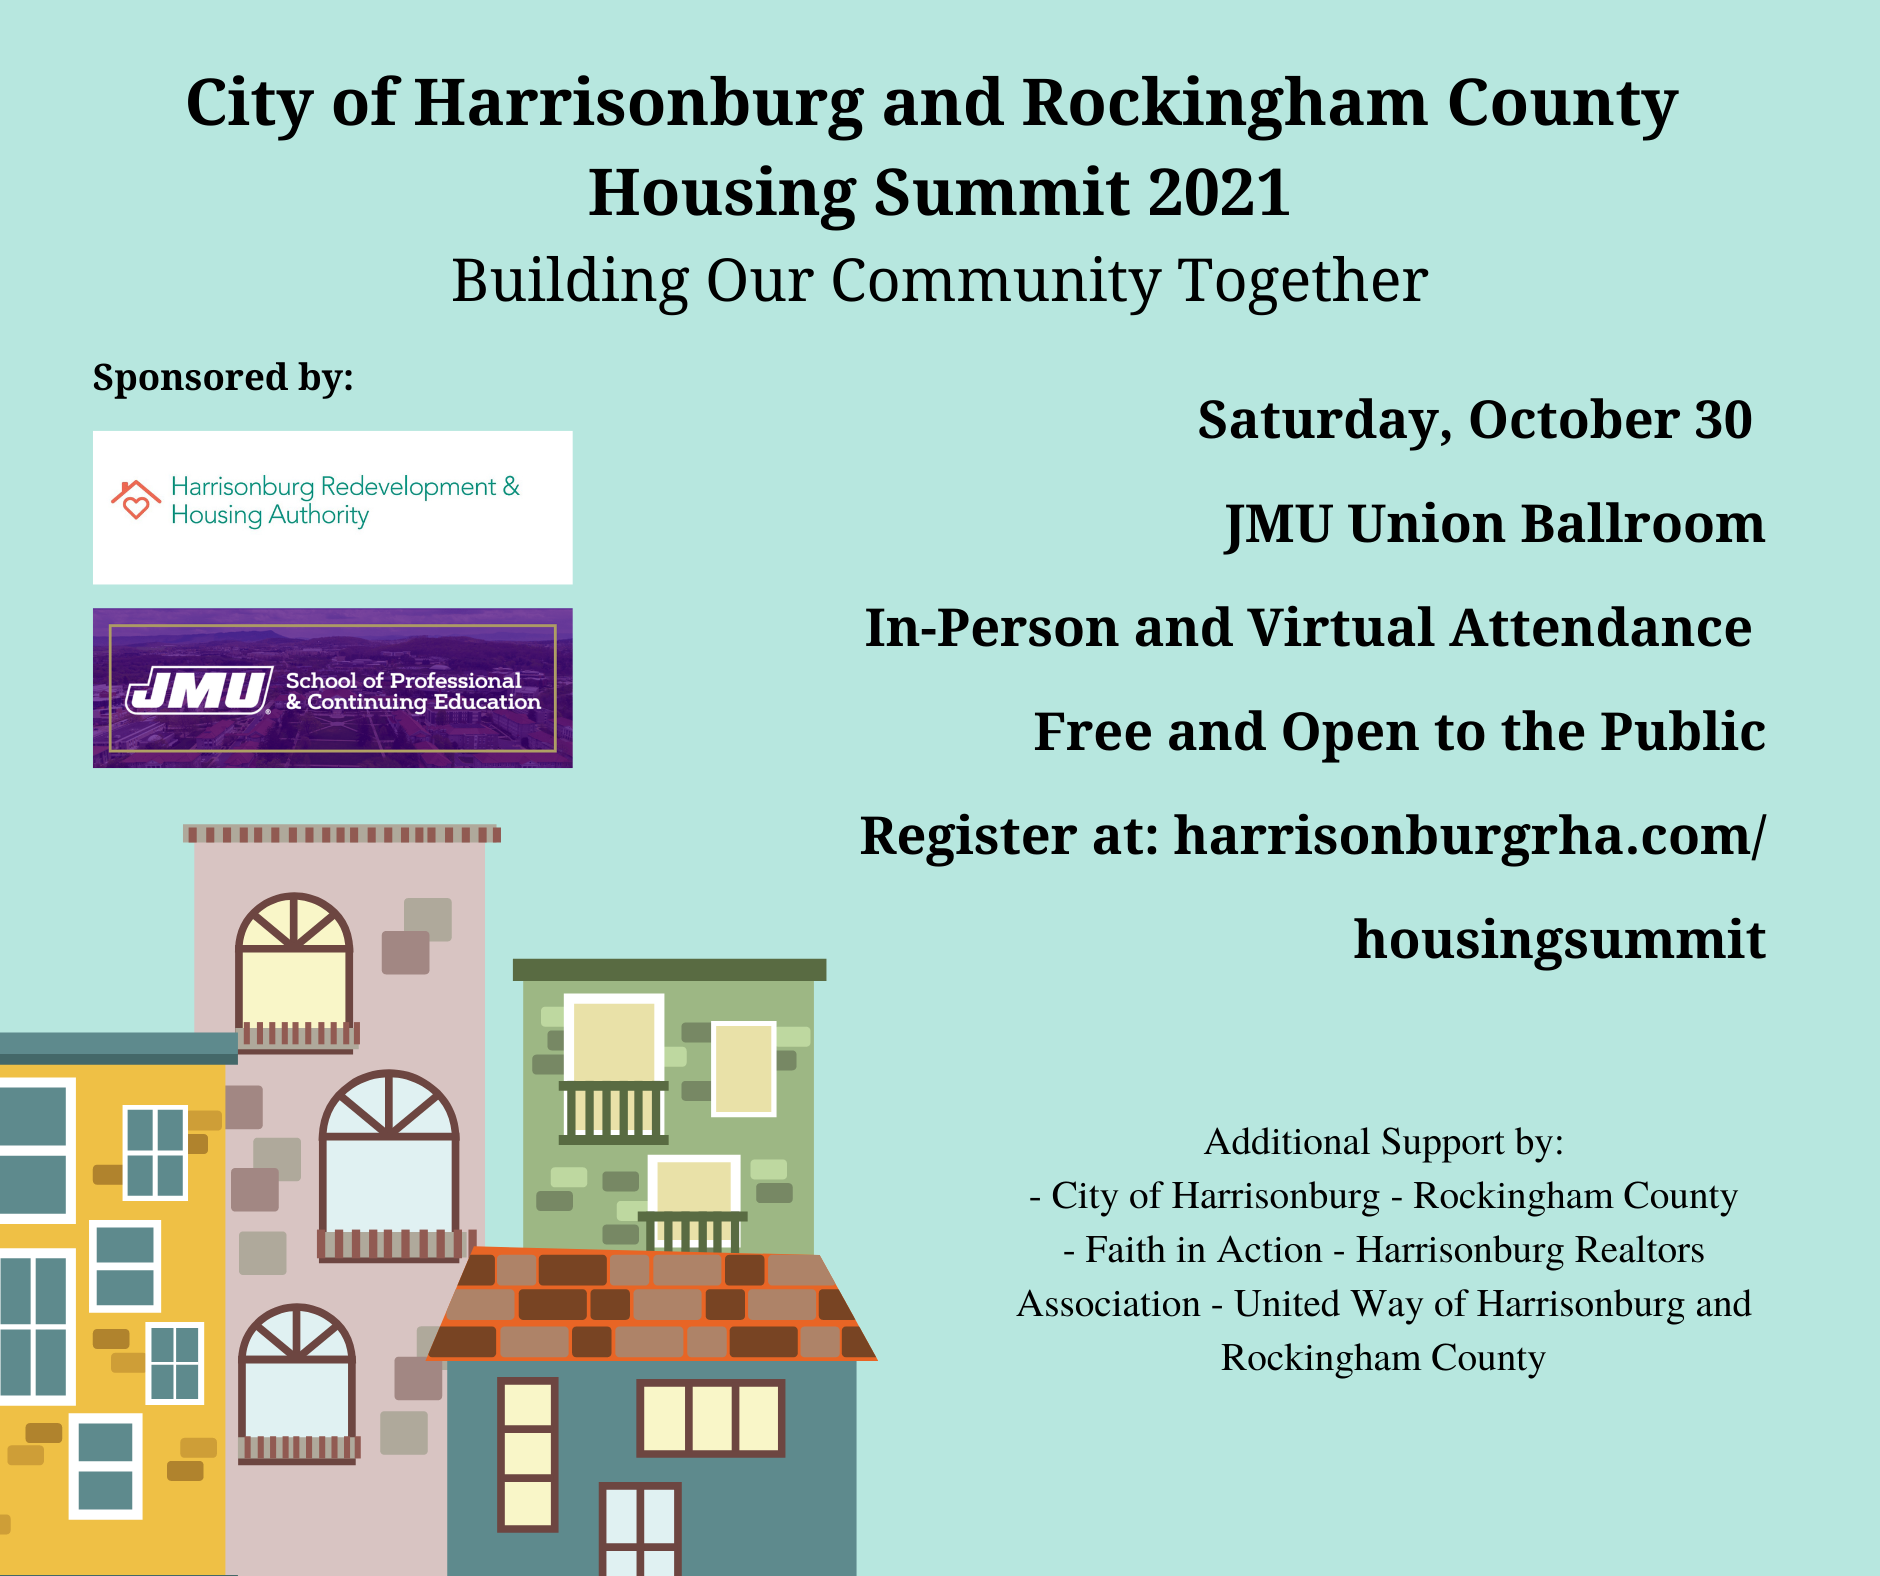 HRHA And Community Stakeholders to Host Housing Summit October 30